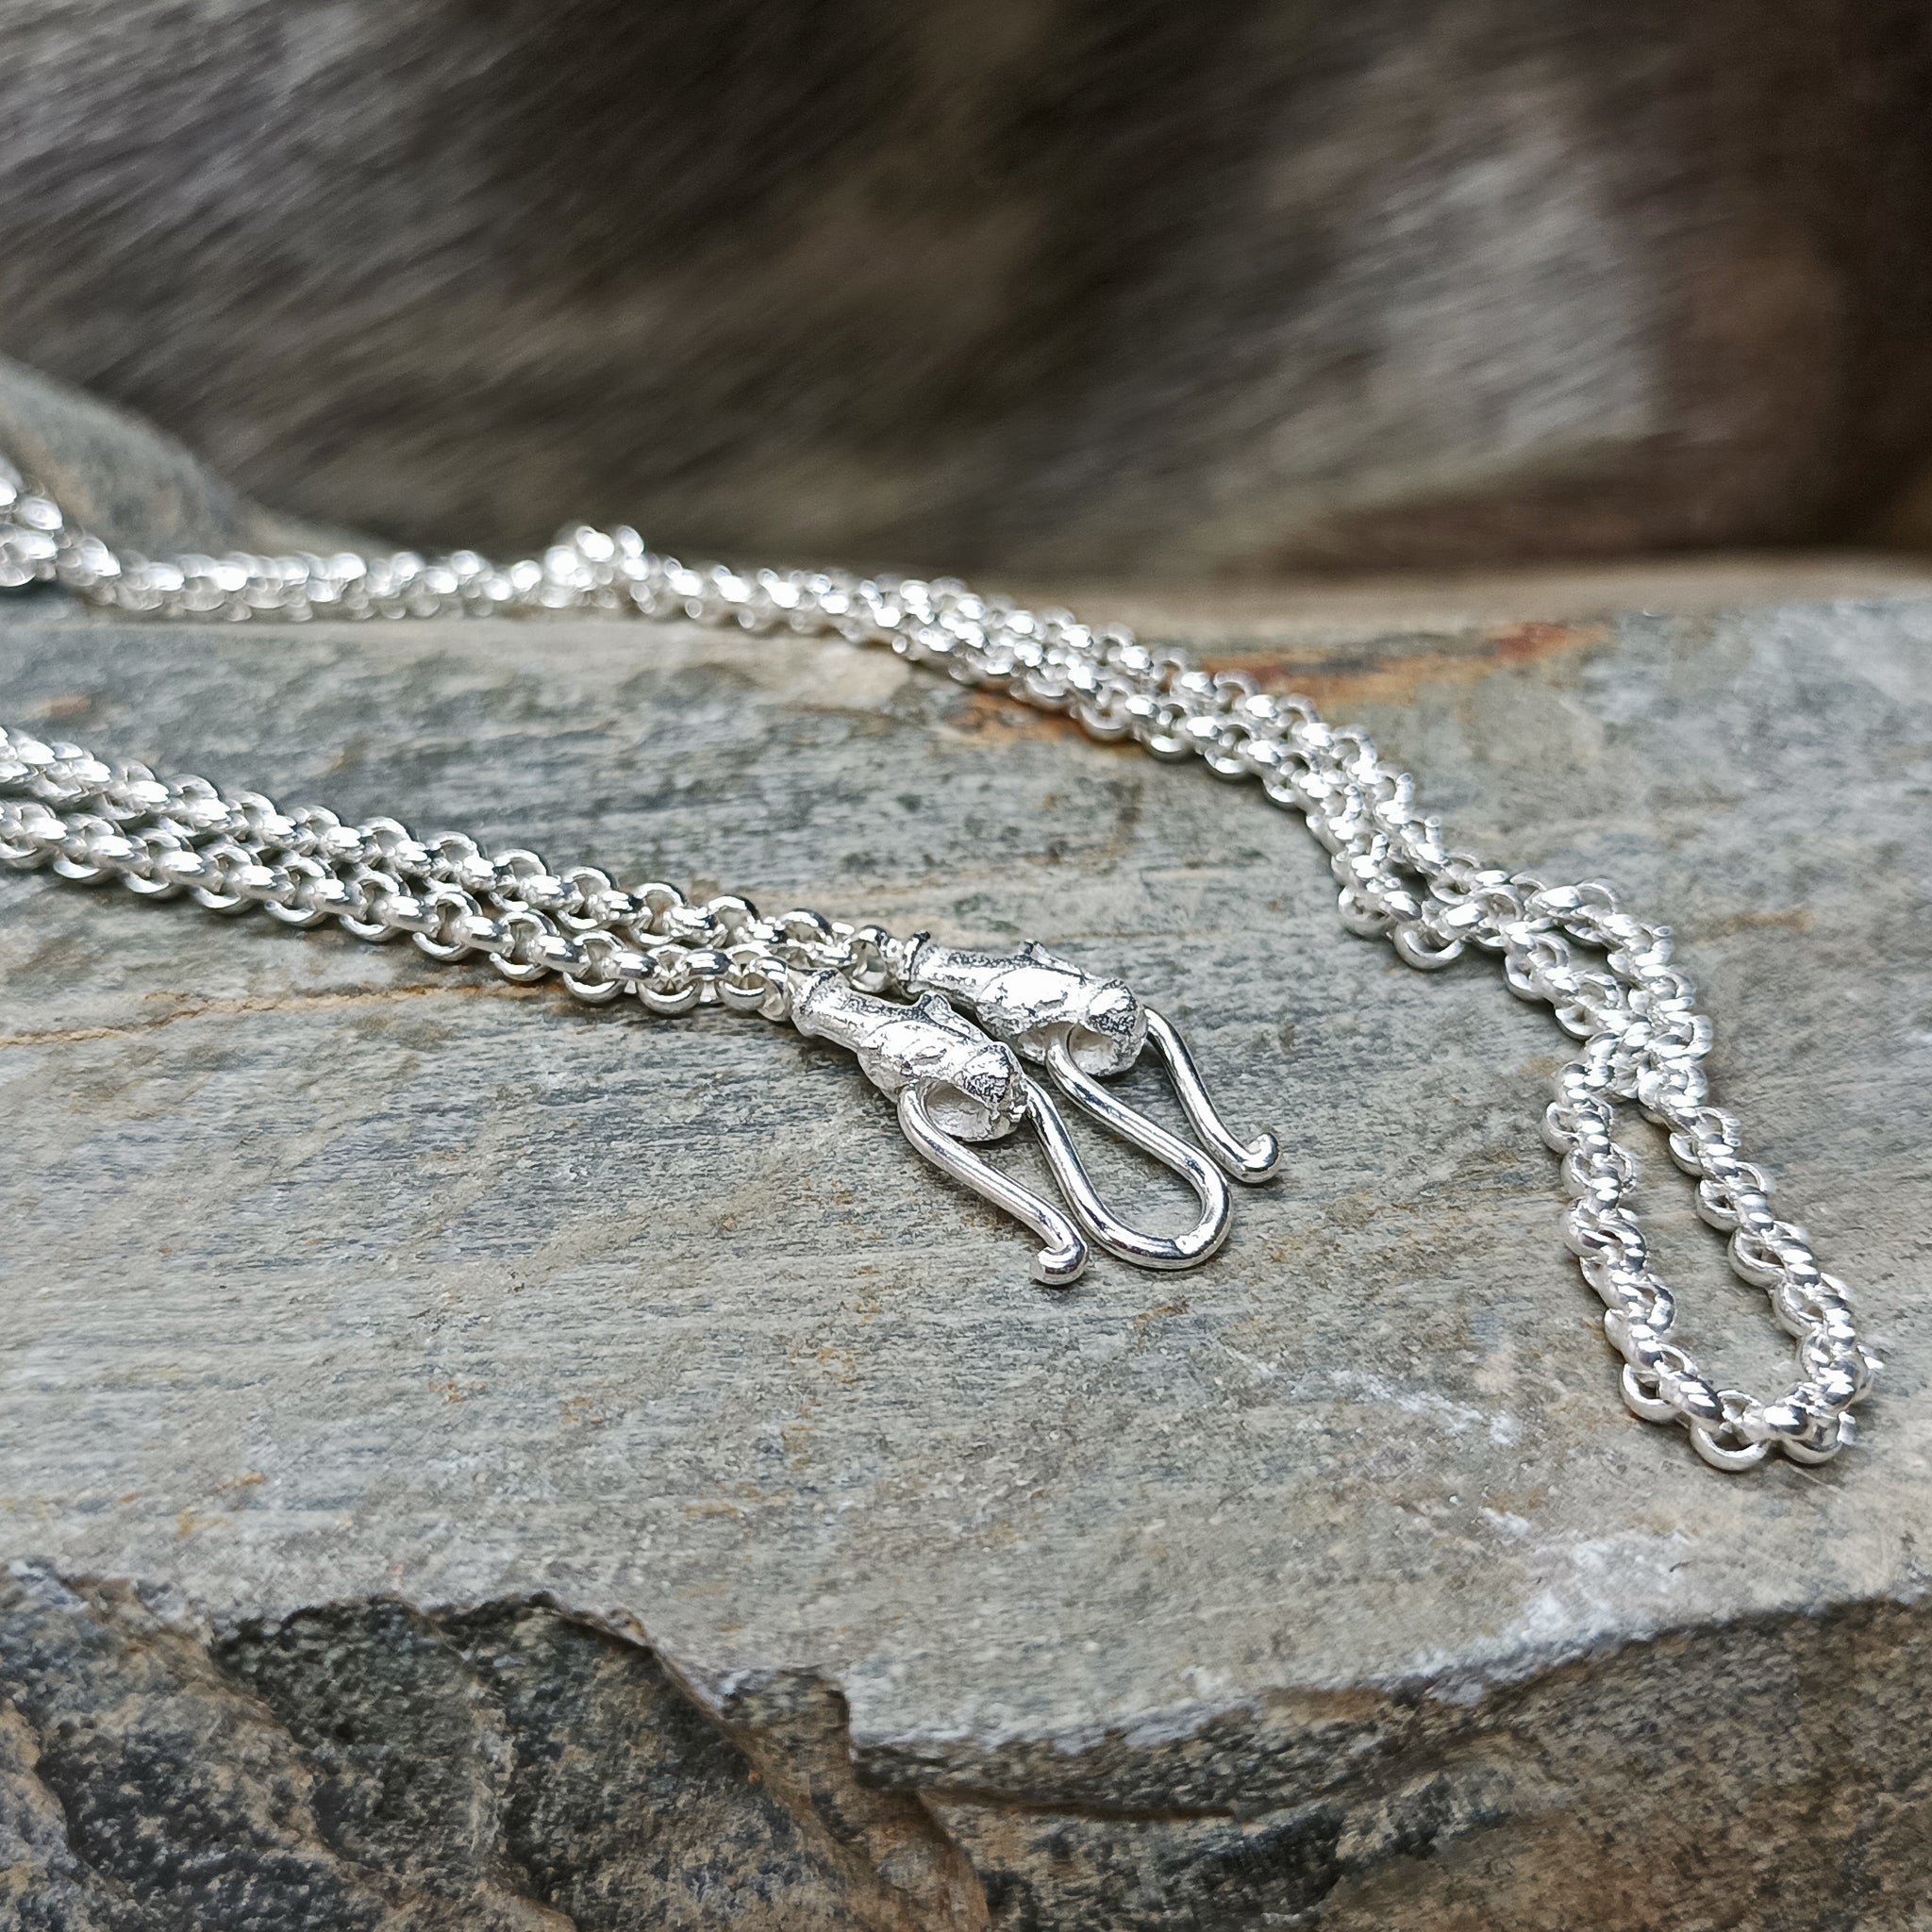 Sterling Silver Viking Necklace with Icelandic Wolf Heads and Anchor Chain Holding Silver Buttefly Fitting on Rock